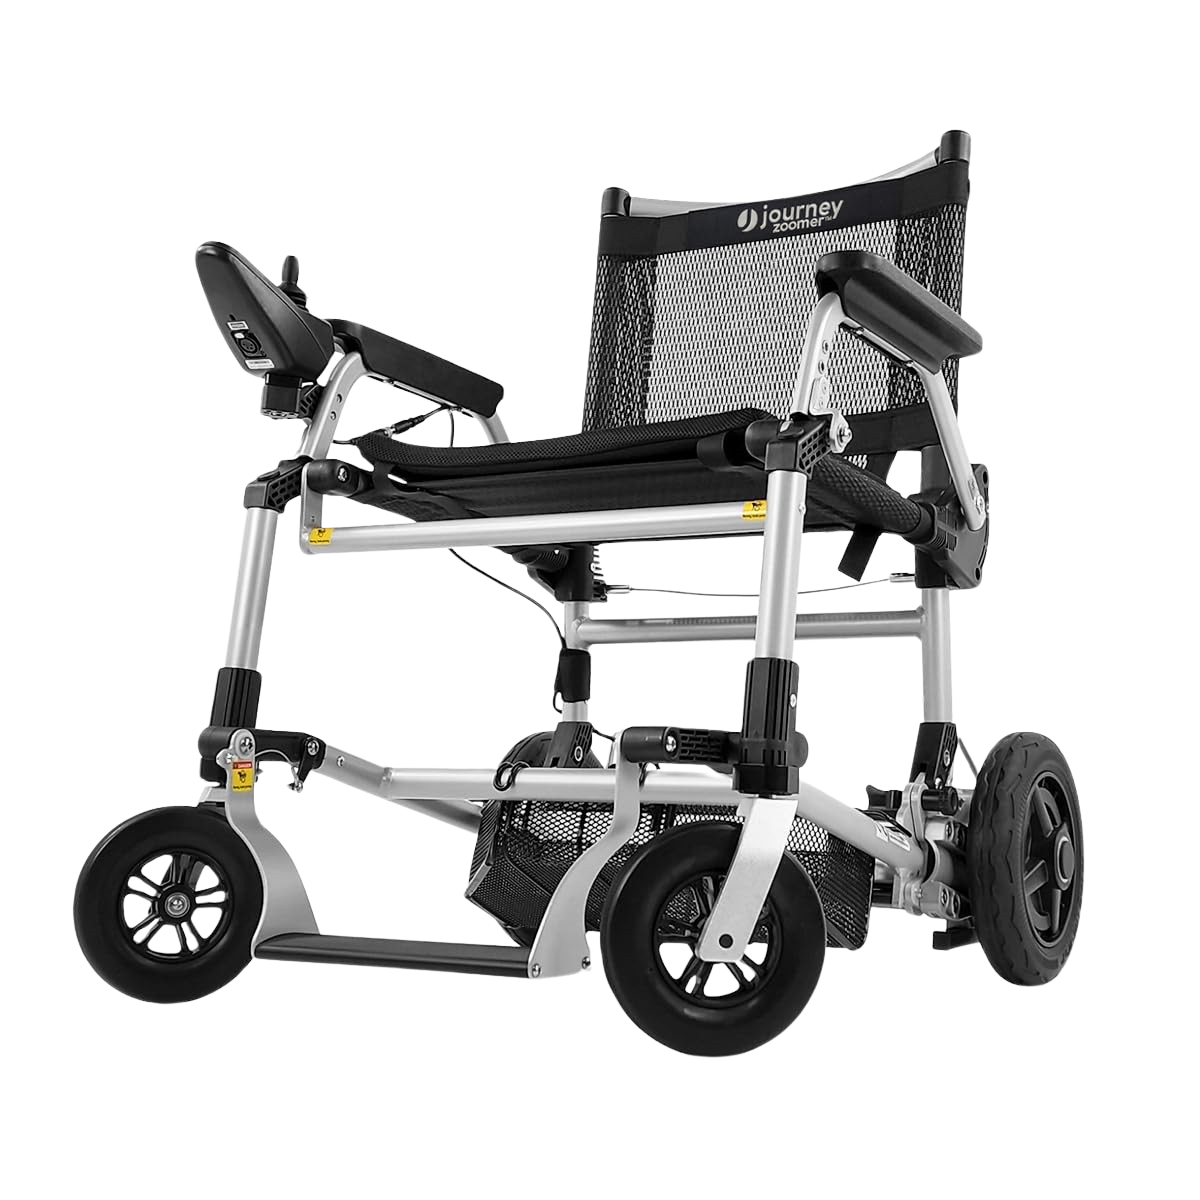 Journey, Journey Zoomer Folding Power Chair 24V 8.76Ah 220W 3.7 MPH 8 Mile Range Left or Right Hand Control 08360 New